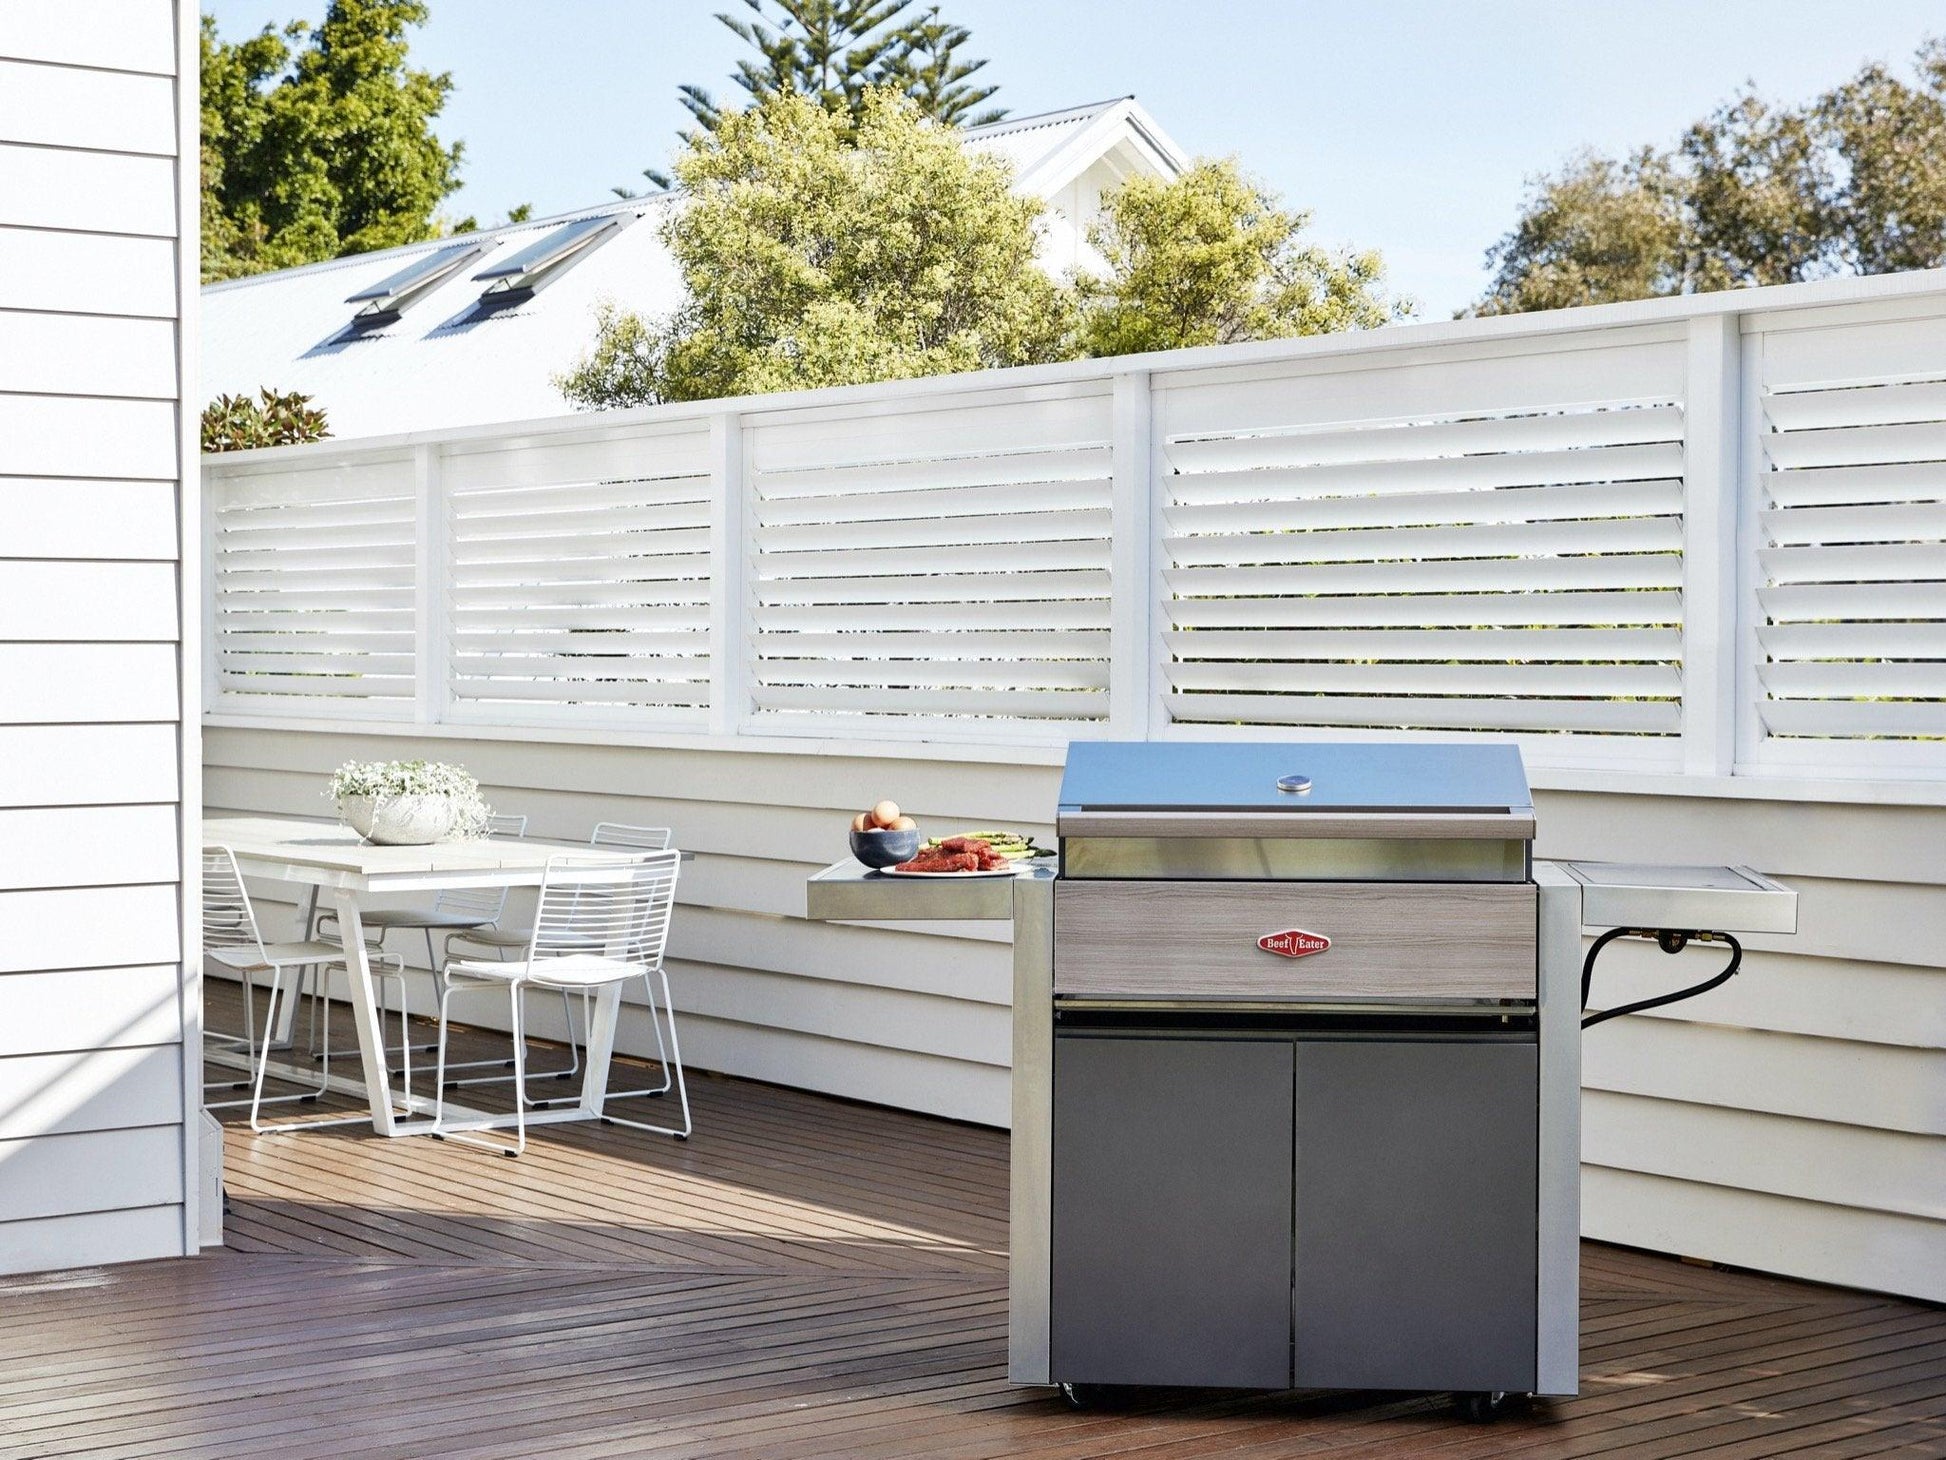 A modern outdoor patio features a Brisks BeefEater 1500 Series 3 Burner BBQ & Trolley on a wooden deck, next to a white dining table with three chairs. A potted plant adorns the table. The area is enclosed by a white privacy fence with horizontal slats. Trees and a house are visible in the background.